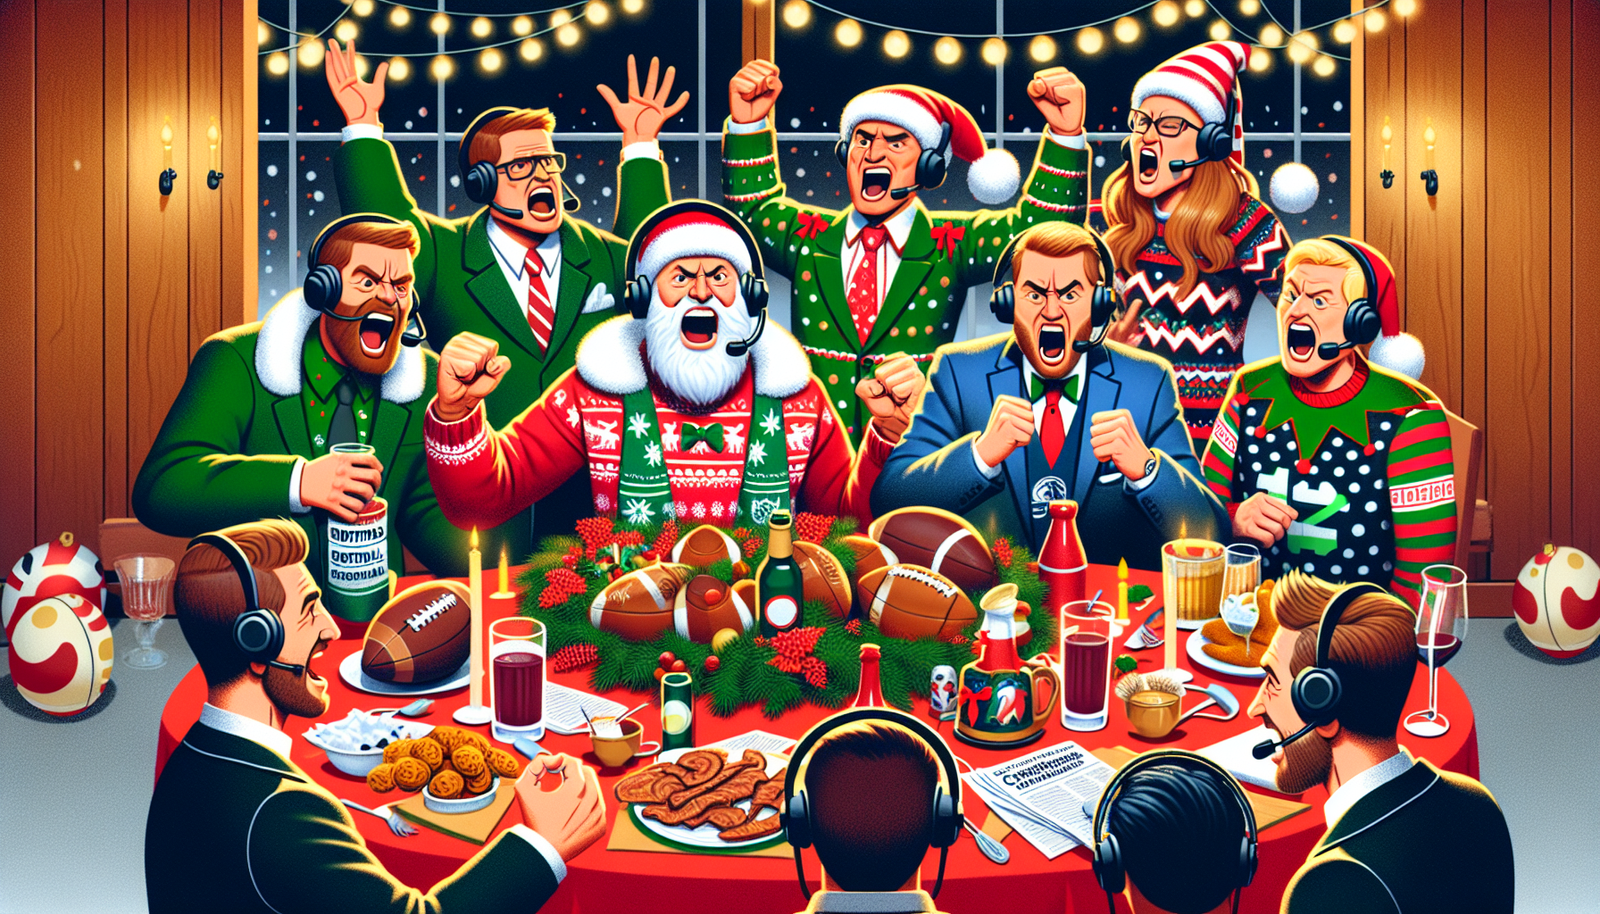 discover who will reign as the ultimate commentator for netflix's exciting christmas nfl games and join the festive fun!